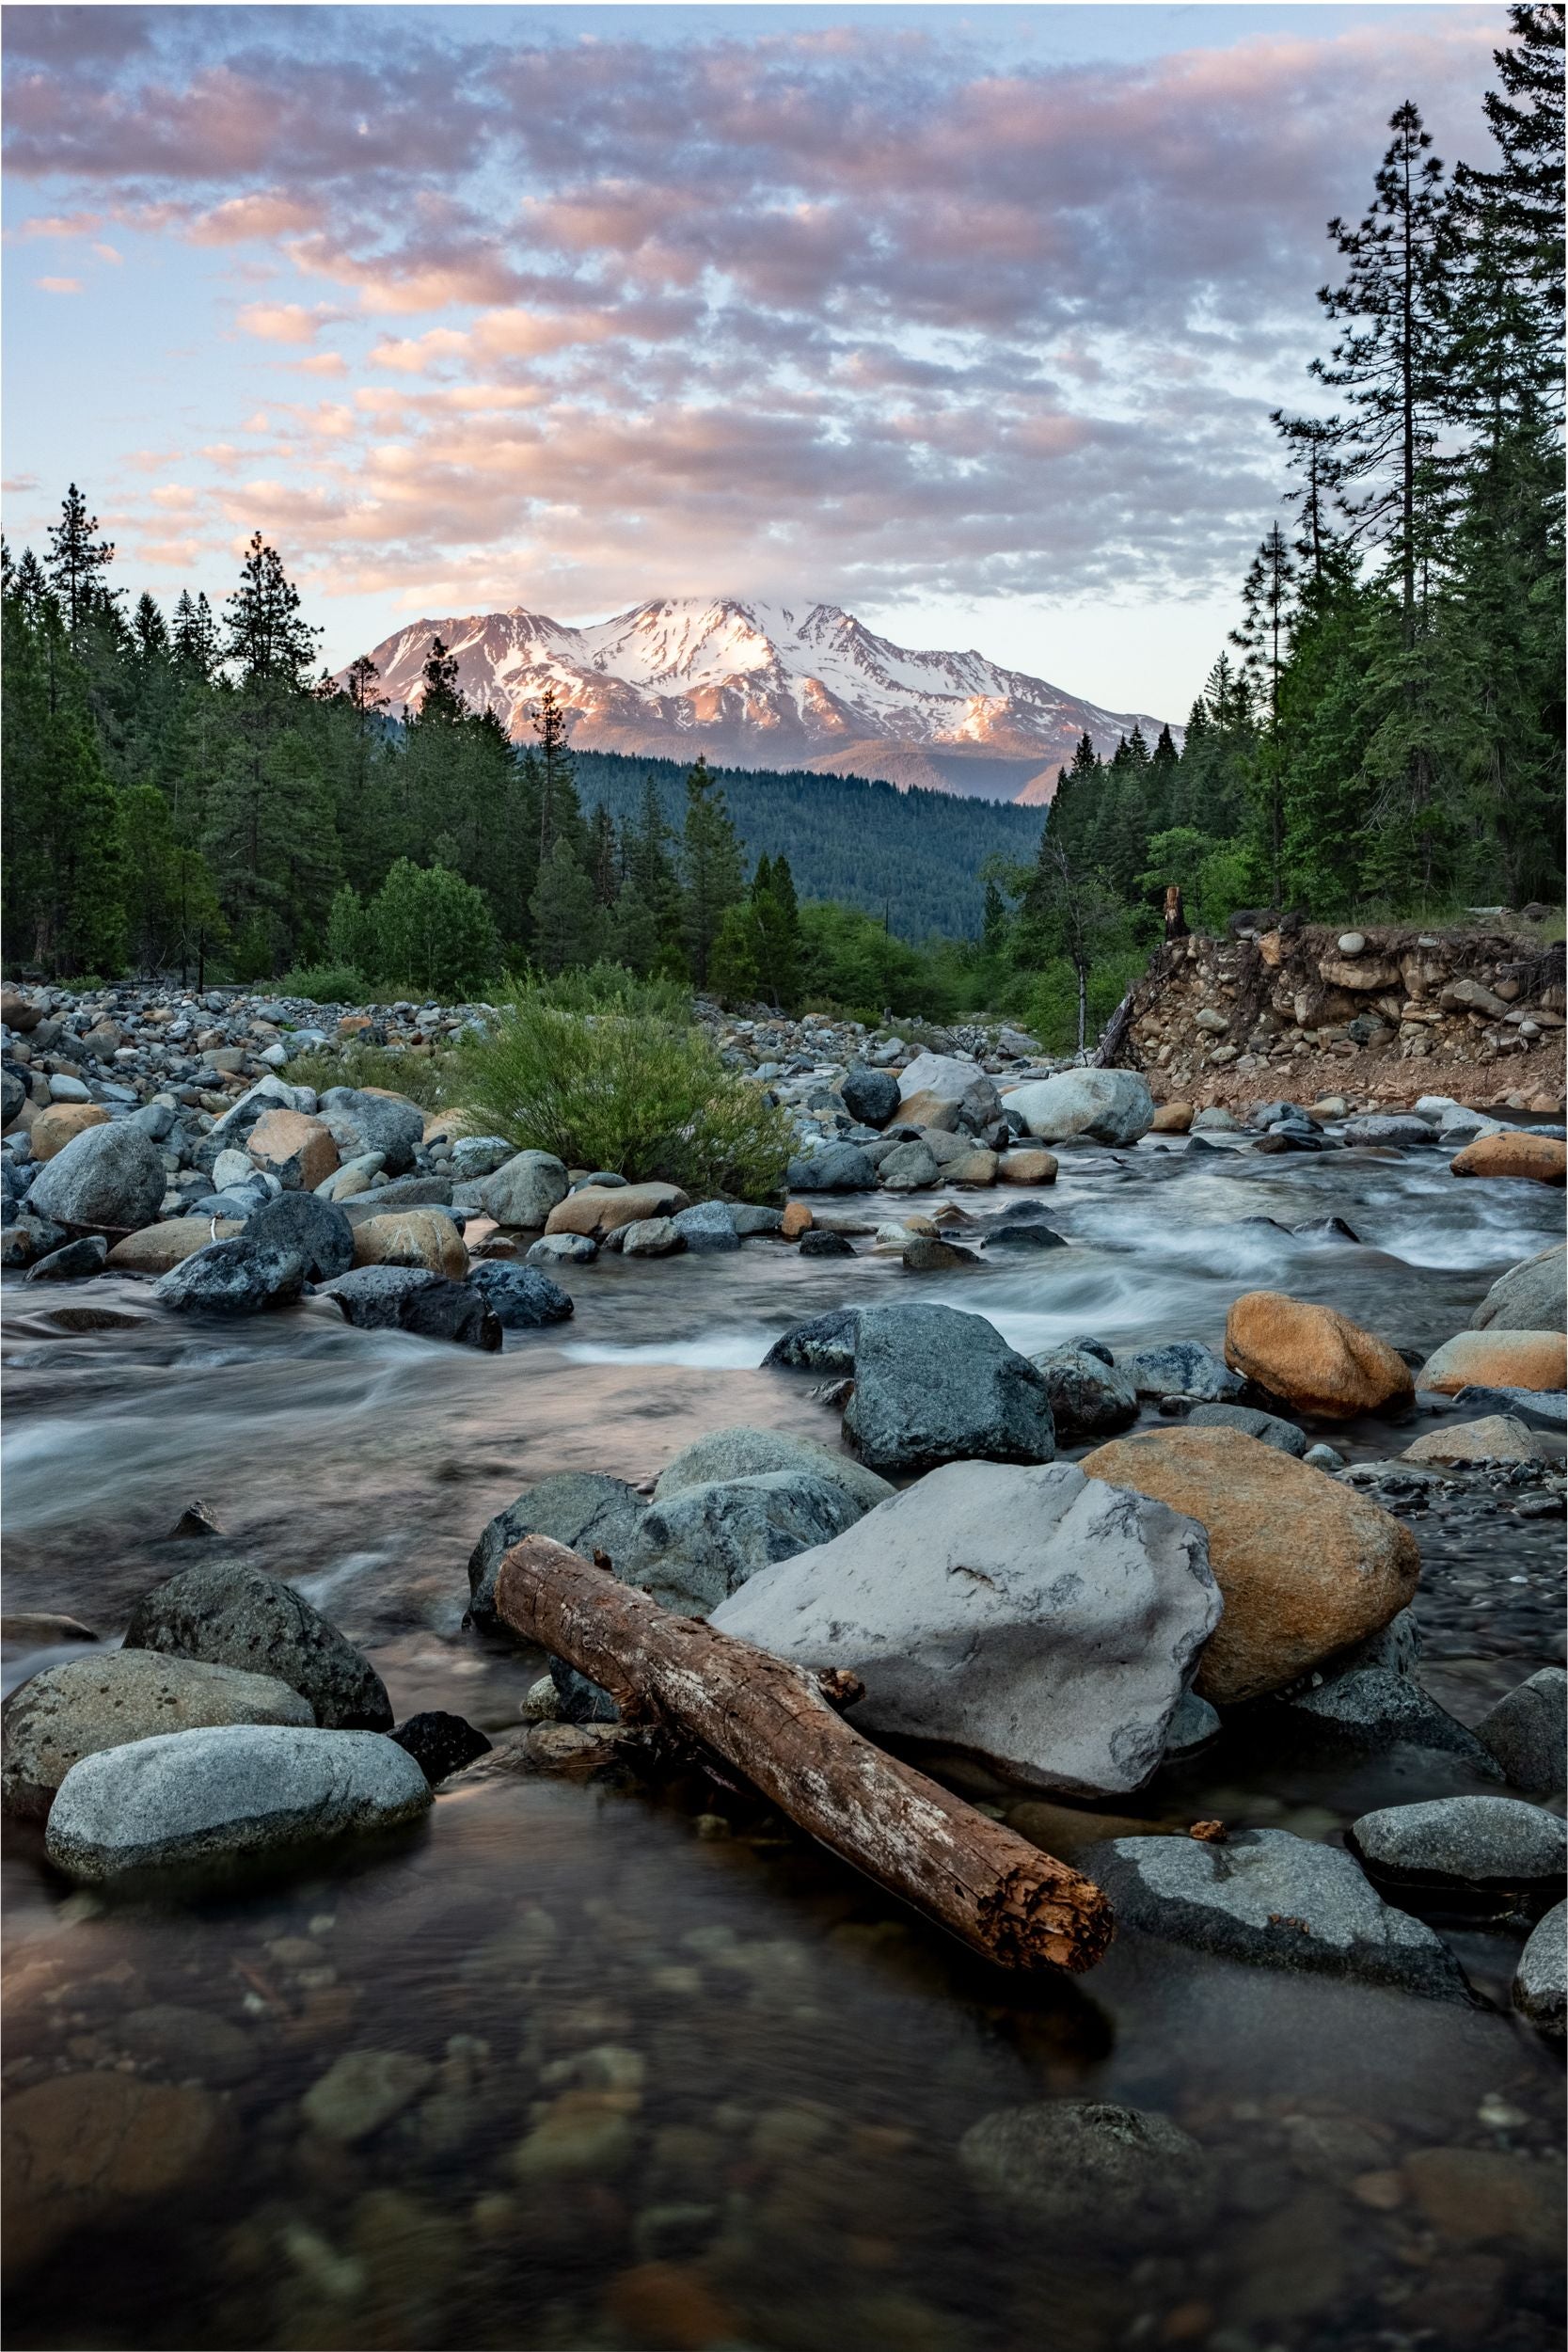 The peak of Mt. Shasta is hidden by pink clouds while a stream flows in the foreground.